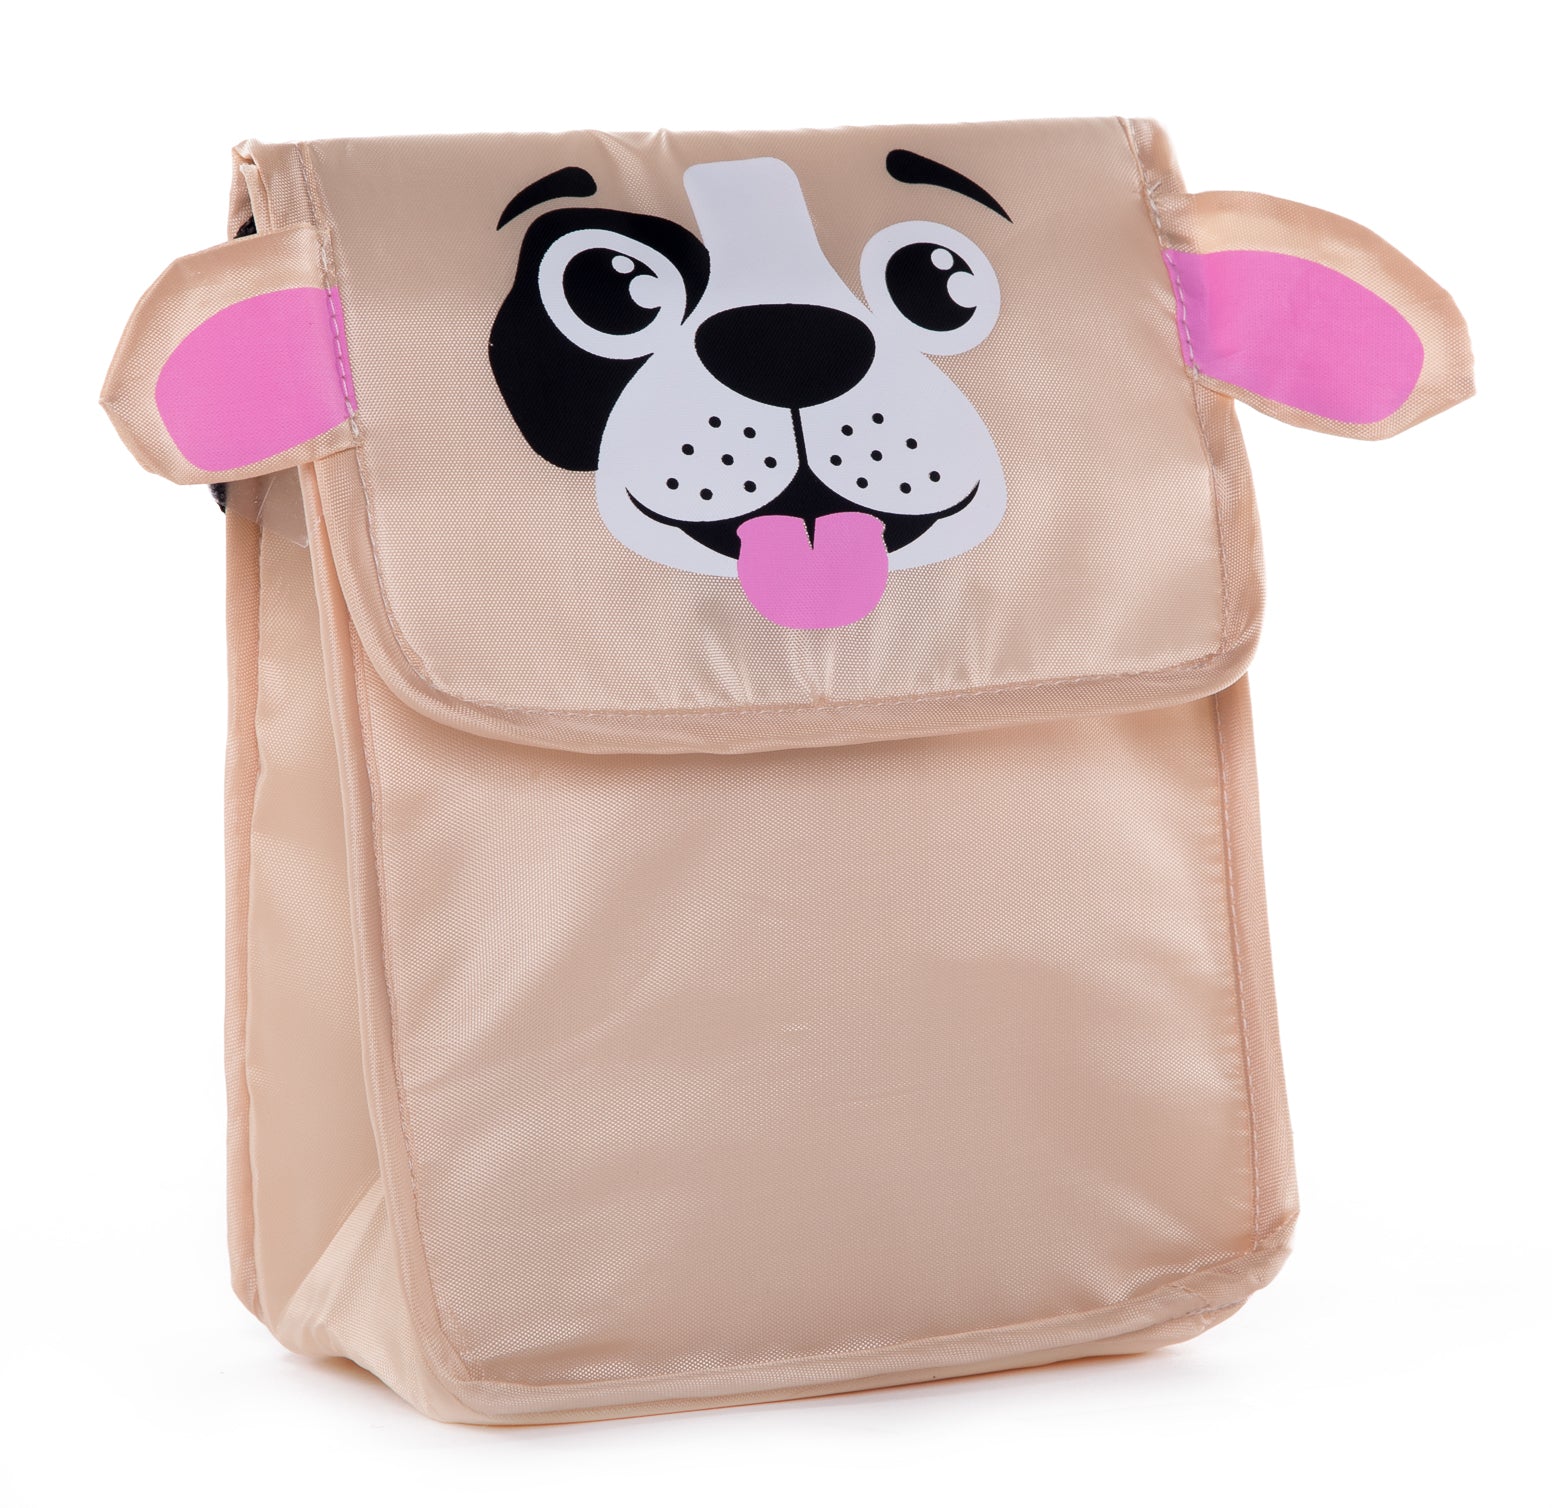 Fun Animal Snack Bag for Kids | Lightweight and Insulated Lunch Bag with Strap, Size: Single, Owl